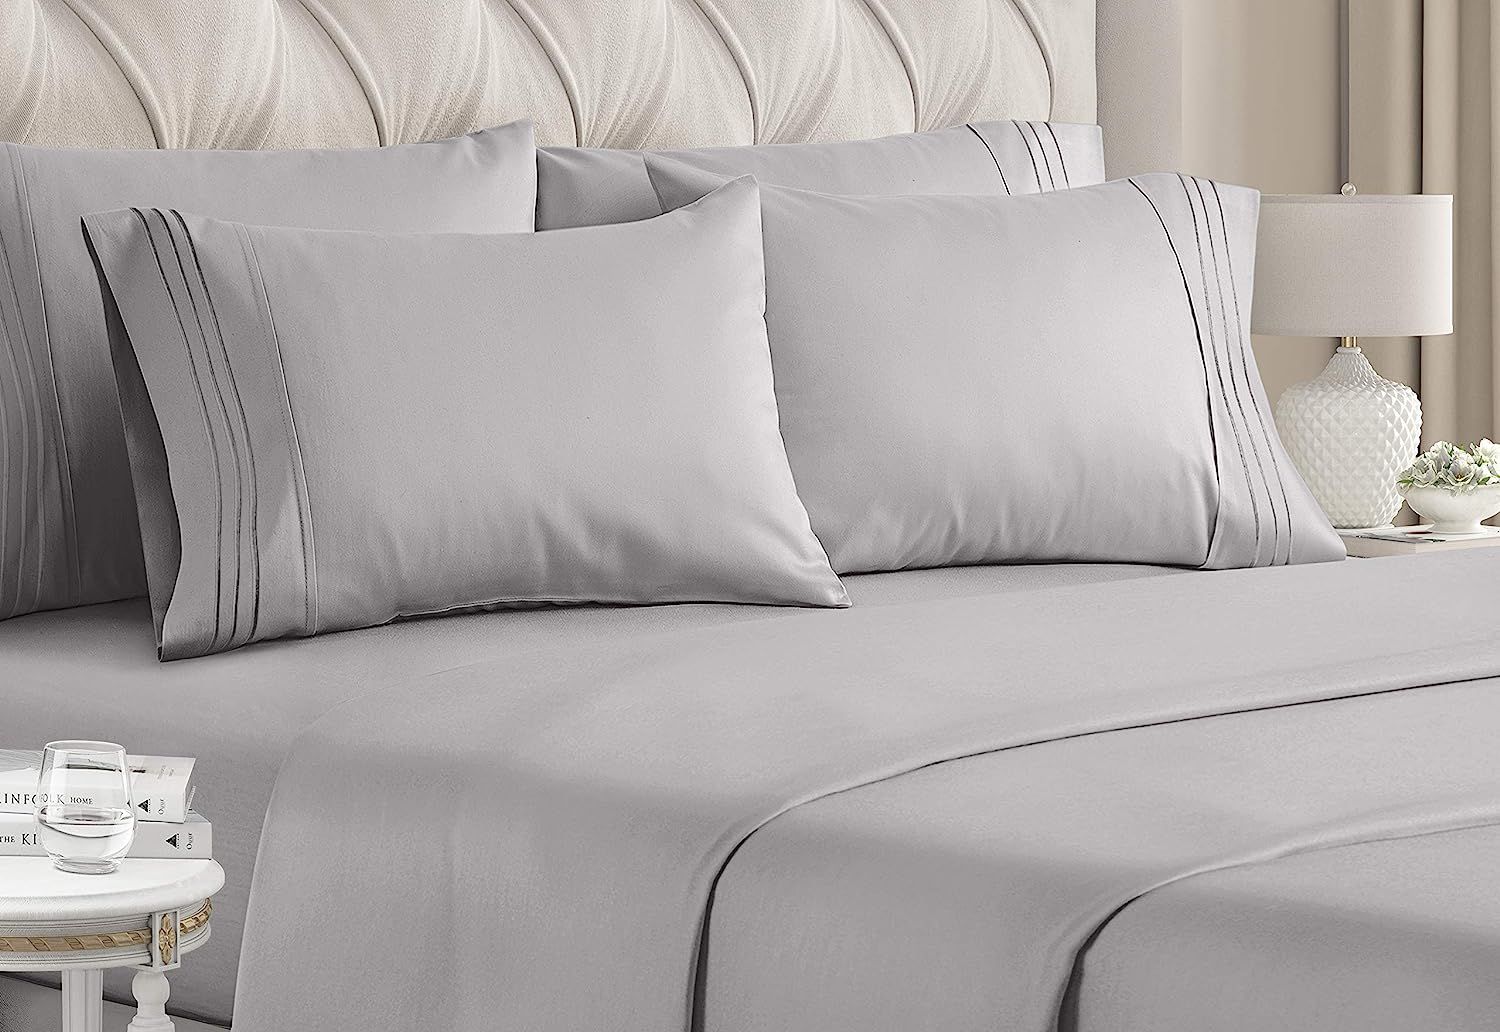 CGK Unlimited Microfiber Breathable/Deep Pocket/Soft, 1800 Thread Count, Solid 6-Piece Bed Sheet ... | Amazon (US)